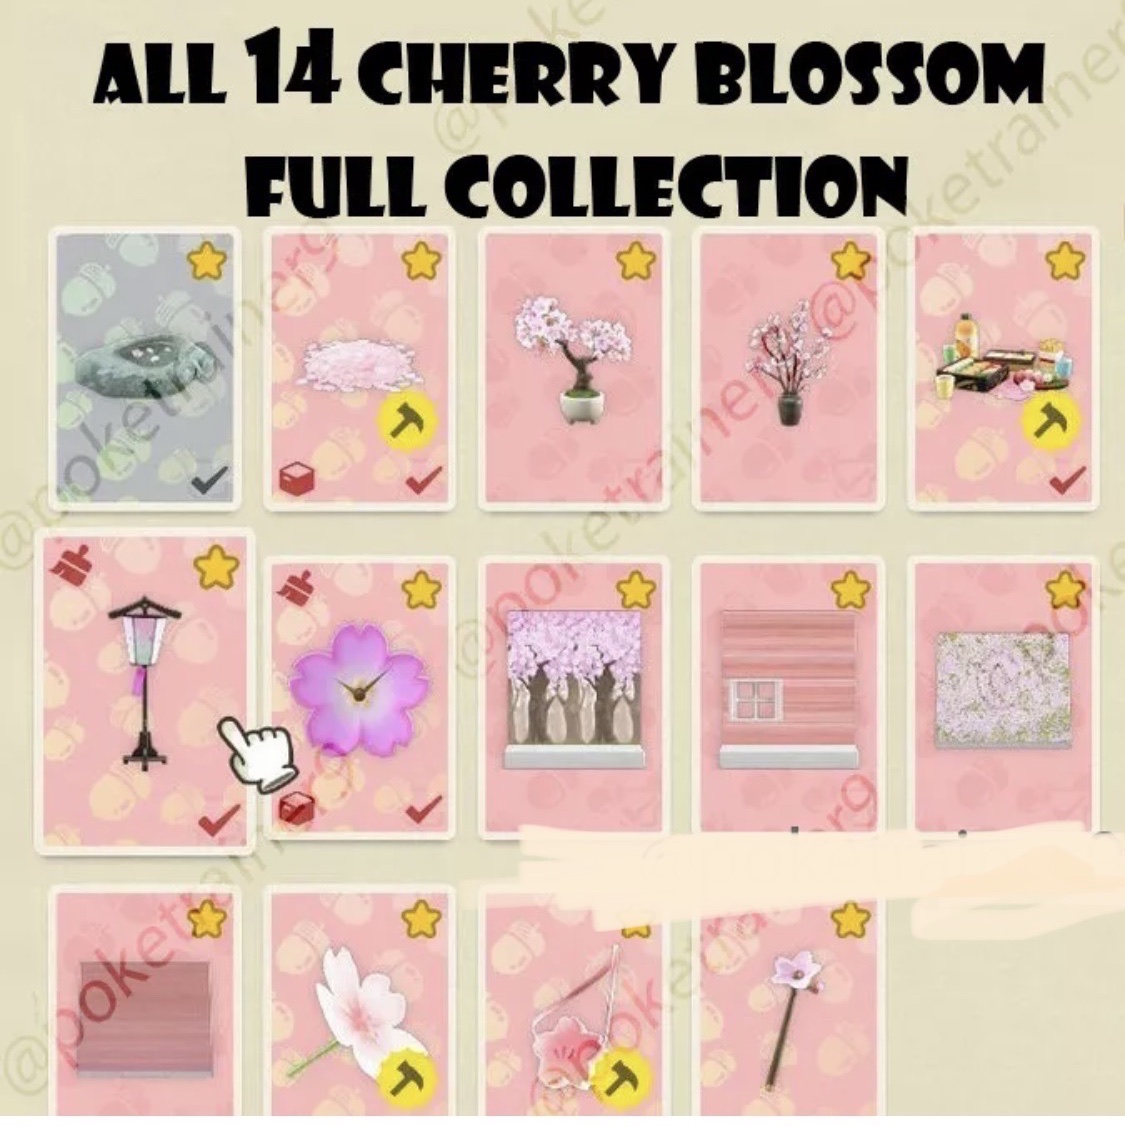 All Cherry Blossom DIY Recipes - Animal Crossing: New Horizons Guide - IGN